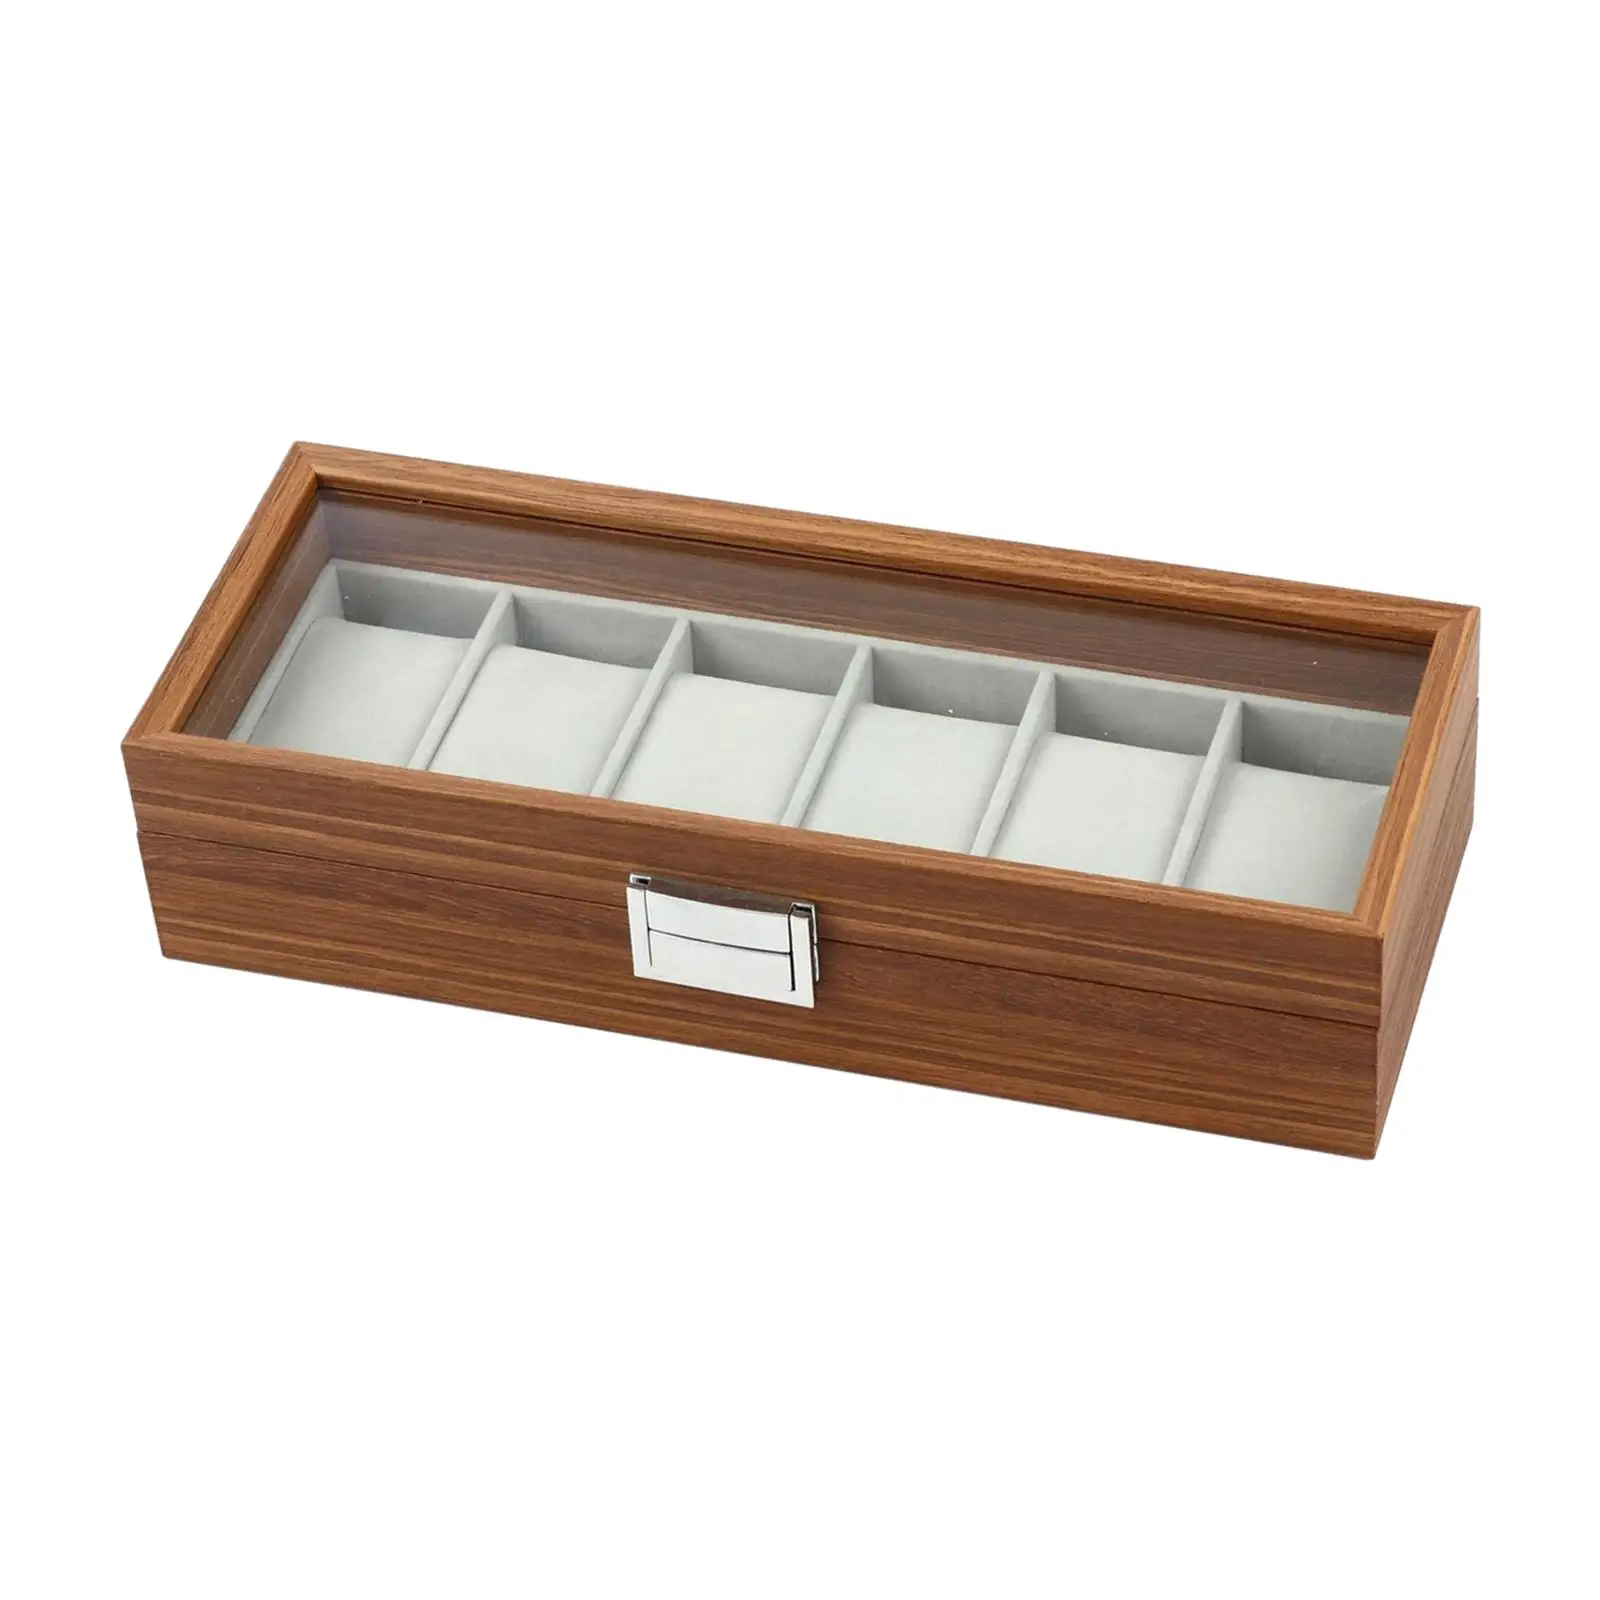 Watch Storage Box 6 Slot Elegant Container Wood Watch Box for Watches Necklace Bracelet Earrings Men and Women Home Decoration